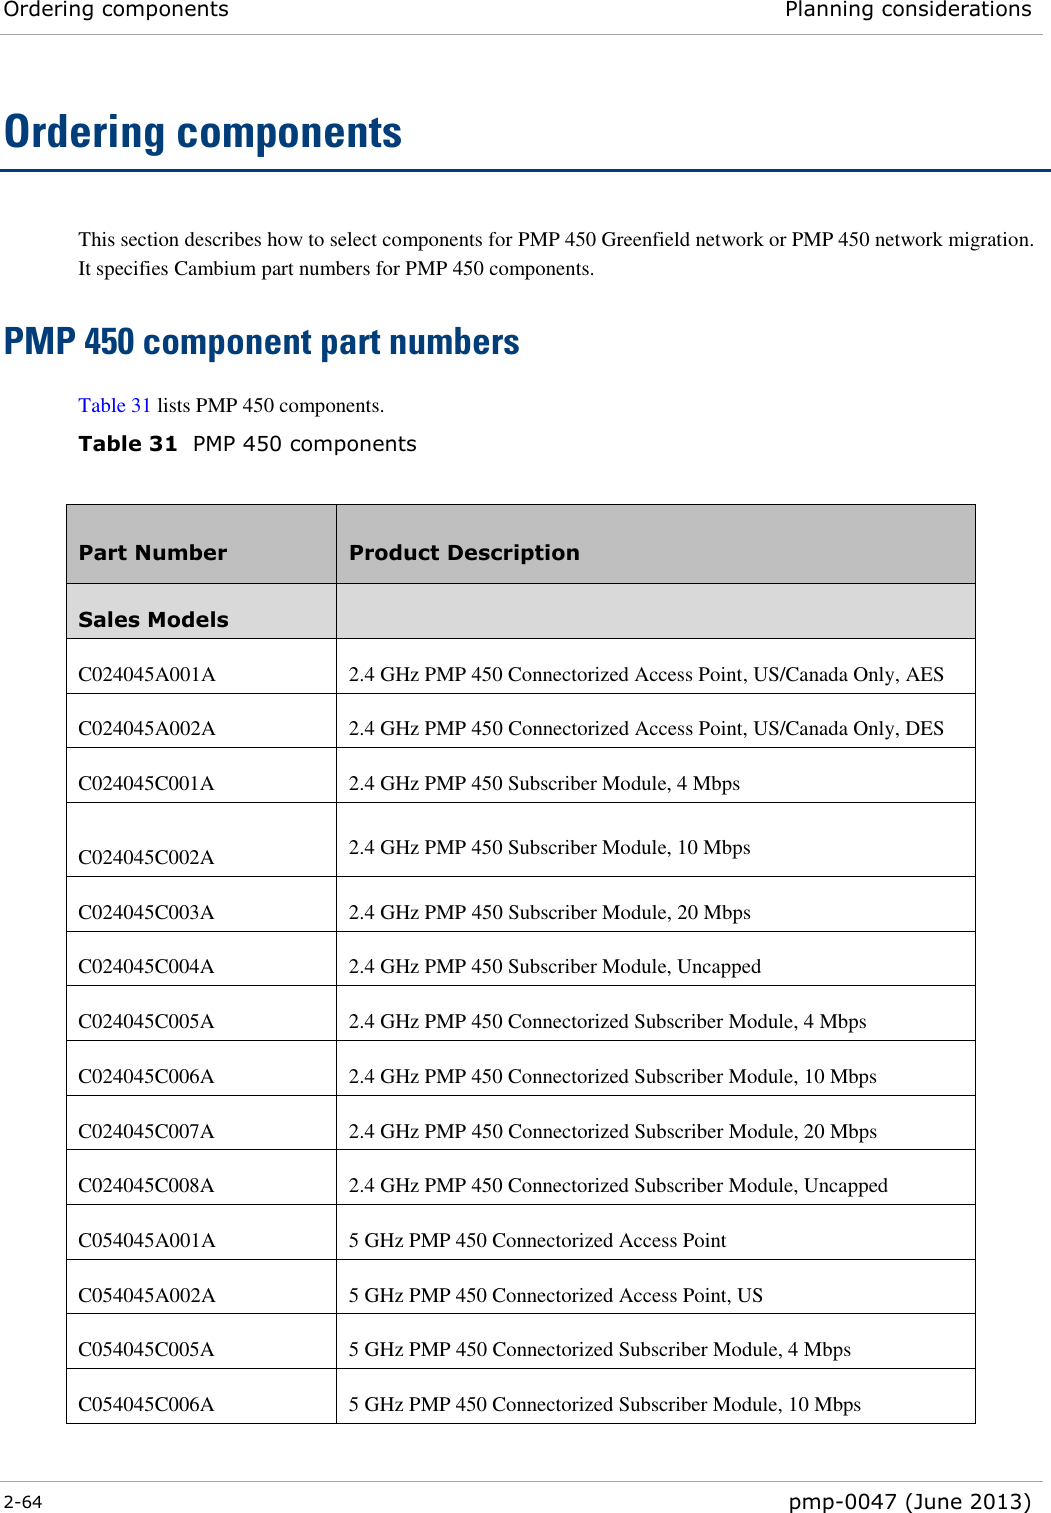 Ordering components Planning considerations  2-64  pmp-0047 (June 2013)  Ordering components This section describes how to select components for PMP 450 Greenfield network or PMP 450 network migration. It specifies Cambium part numbers for PMP 450 components. PMP 450 component part numbers Table 31 lists PMP 450 components. Table 31  PMP 450 components  Part Number Product Description Sales Models  C024045A001A 2.4 GHz PMP 450 Connectorized Access Point, US/Canada Only, AES C024045A002A 2.4 GHz PMP 450 Connectorized Access Point, US/Canada Only, DES C024045C001A 2.4 GHz PMP 450 Subscriber Module, 4 Mbps C024045C002A 2.4 GHz PMP 450 Subscriber Module, 10 Mbps C024045C003A 2.4 GHz PMP 450 Subscriber Module, 20 Mbps C024045C004A 2.4 GHz PMP 450 Subscriber Module, Uncapped C024045C005A 2.4 GHz PMP 450 Connectorized Subscriber Module, 4 Mbps C024045C006A 2.4 GHz PMP 450 Connectorized Subscriber Module, 10 Mbps C024045C007A 2.4 GHz PMP 450 Connectorized Subscriber Module, 20 Mbps C024045C008A 2.4 GHz PMP 450 Connectorized Subscriber Module, Uncapped C054045A001A 5 GHz PMP 450 Connectorized Access Point C054045A002A 5 GHz PMP 450 Connectorized Access Point, US C054045C005A 5 GHz PMP 450 Connectorized Subscriber Module, 4 Mbps C054045C006A 5 GHz PMP 450 Connectorized Subscriber Module, 10 Mbps 